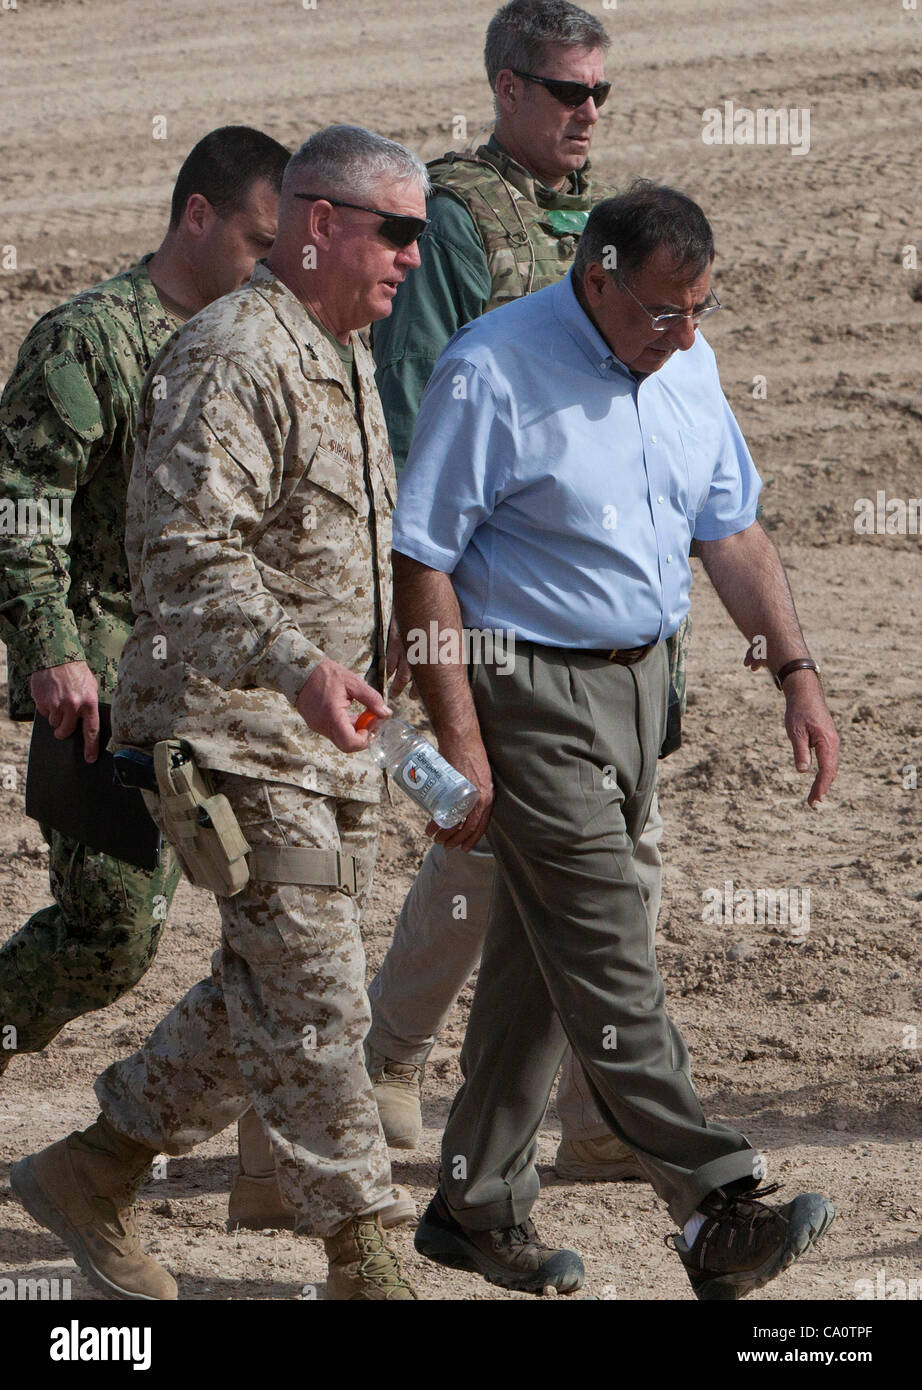 US Secretary of Defense Leon Panetta, right, talks to US Marine Corps Maj. Gen. Charles M. Gurganus, front, the commanding general of Regional Command Southwest at Forward Operating Base Shukvani during his visit March 14, 2012 in Afghanistan. Stock Photo